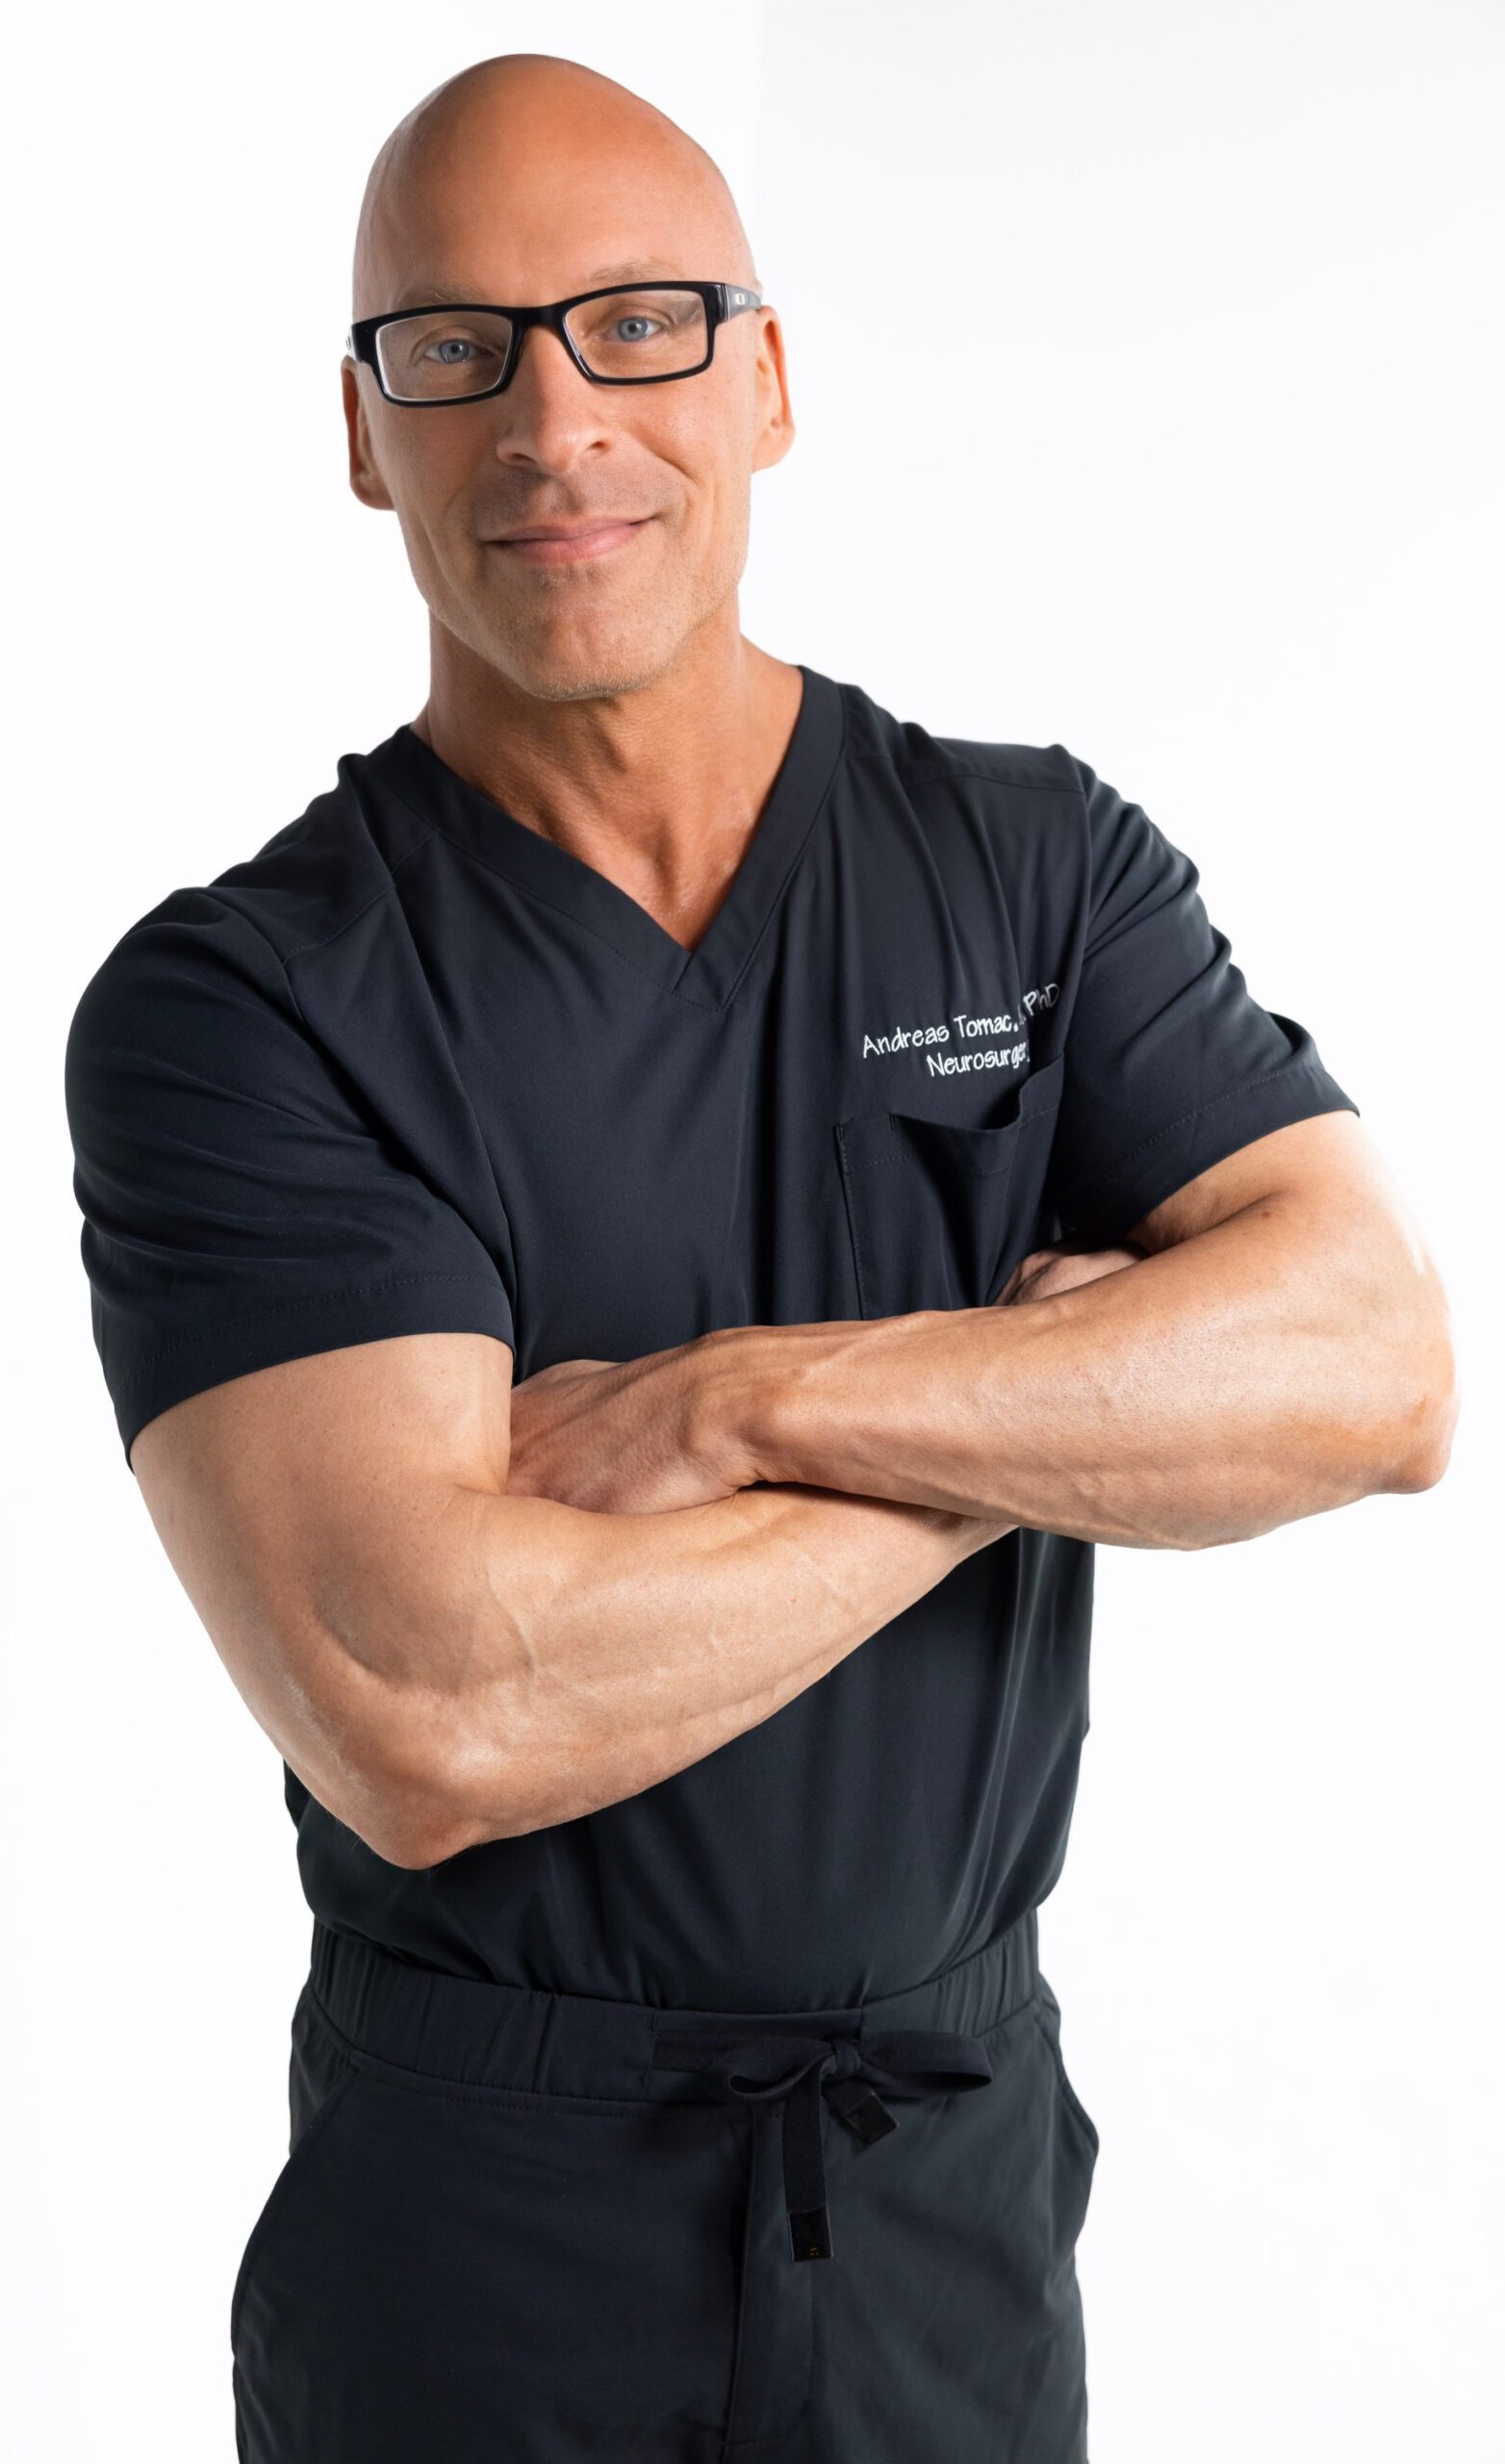 Dr Tomac, Neurosurgeon in Hollywood and Miami, FL